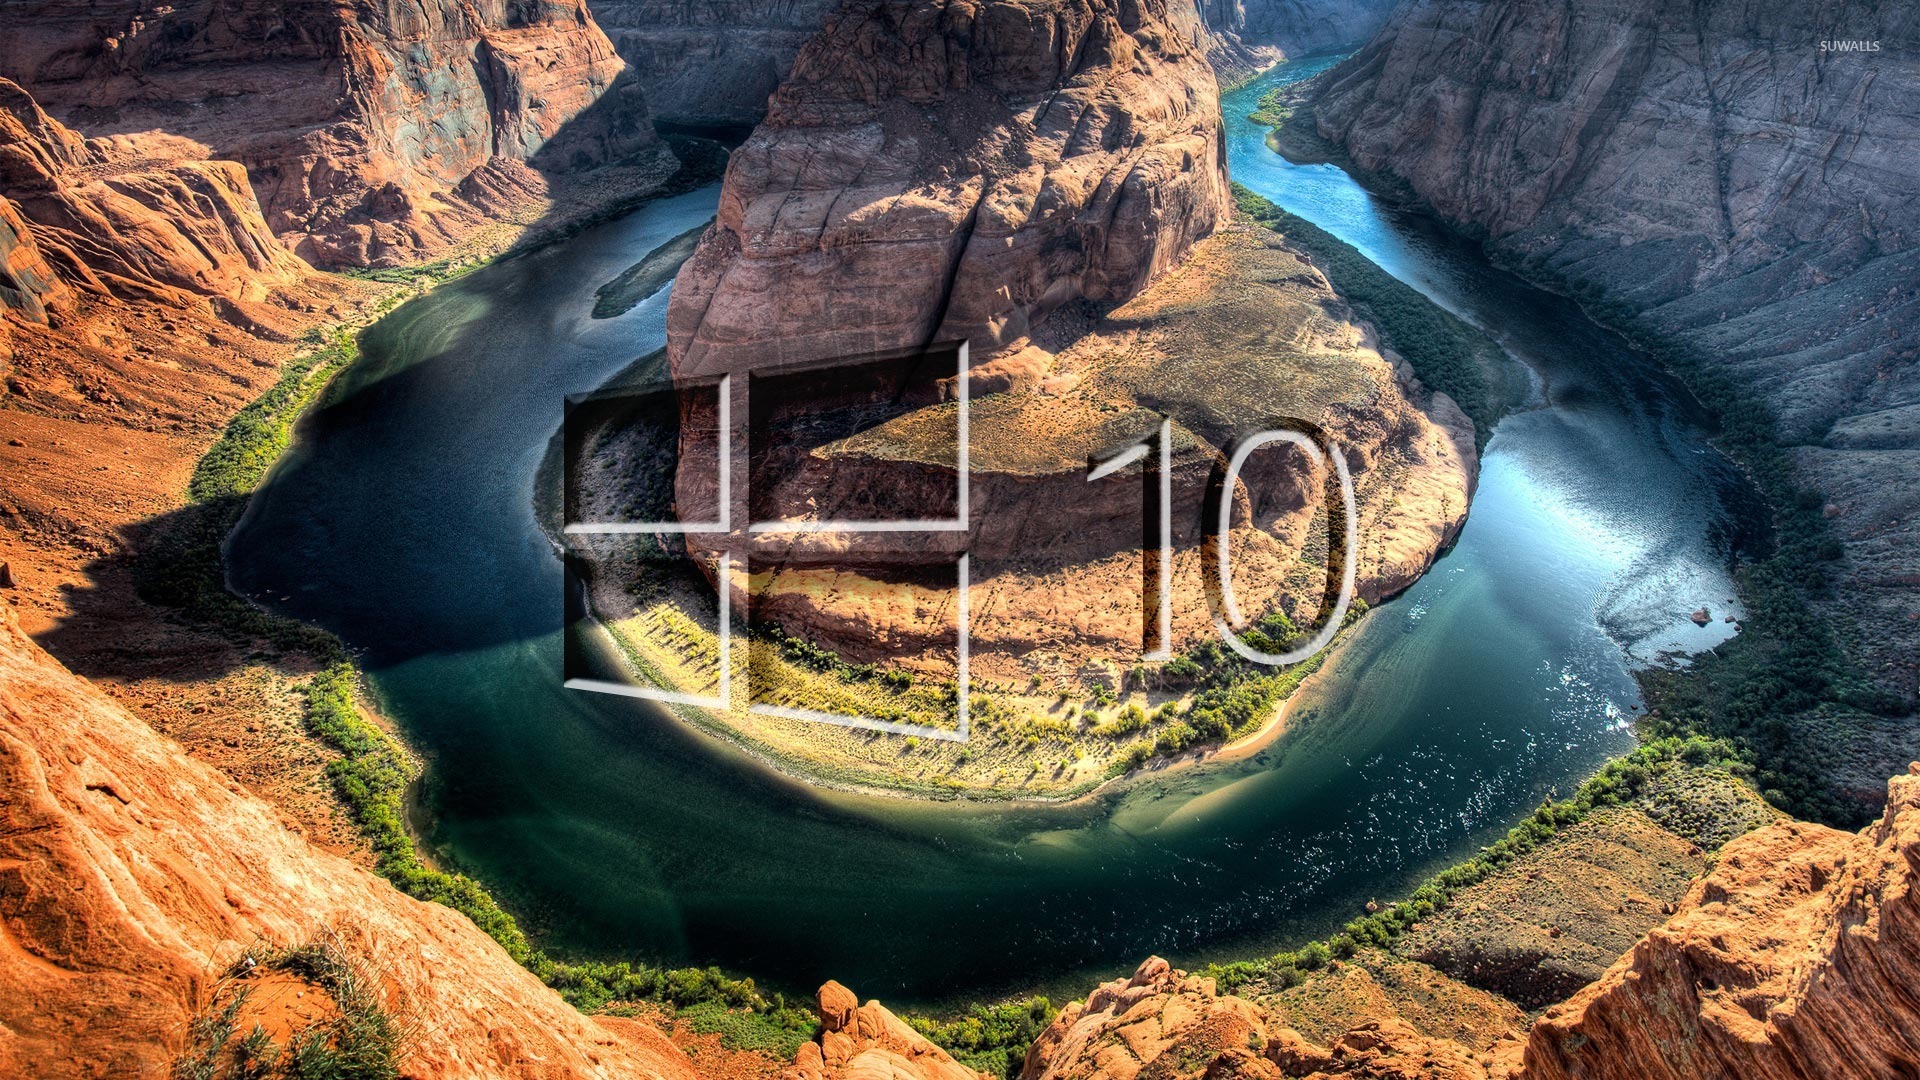 Windows 10 over the canyon glass logo wallpaper - Computer wallpapers -  #47207